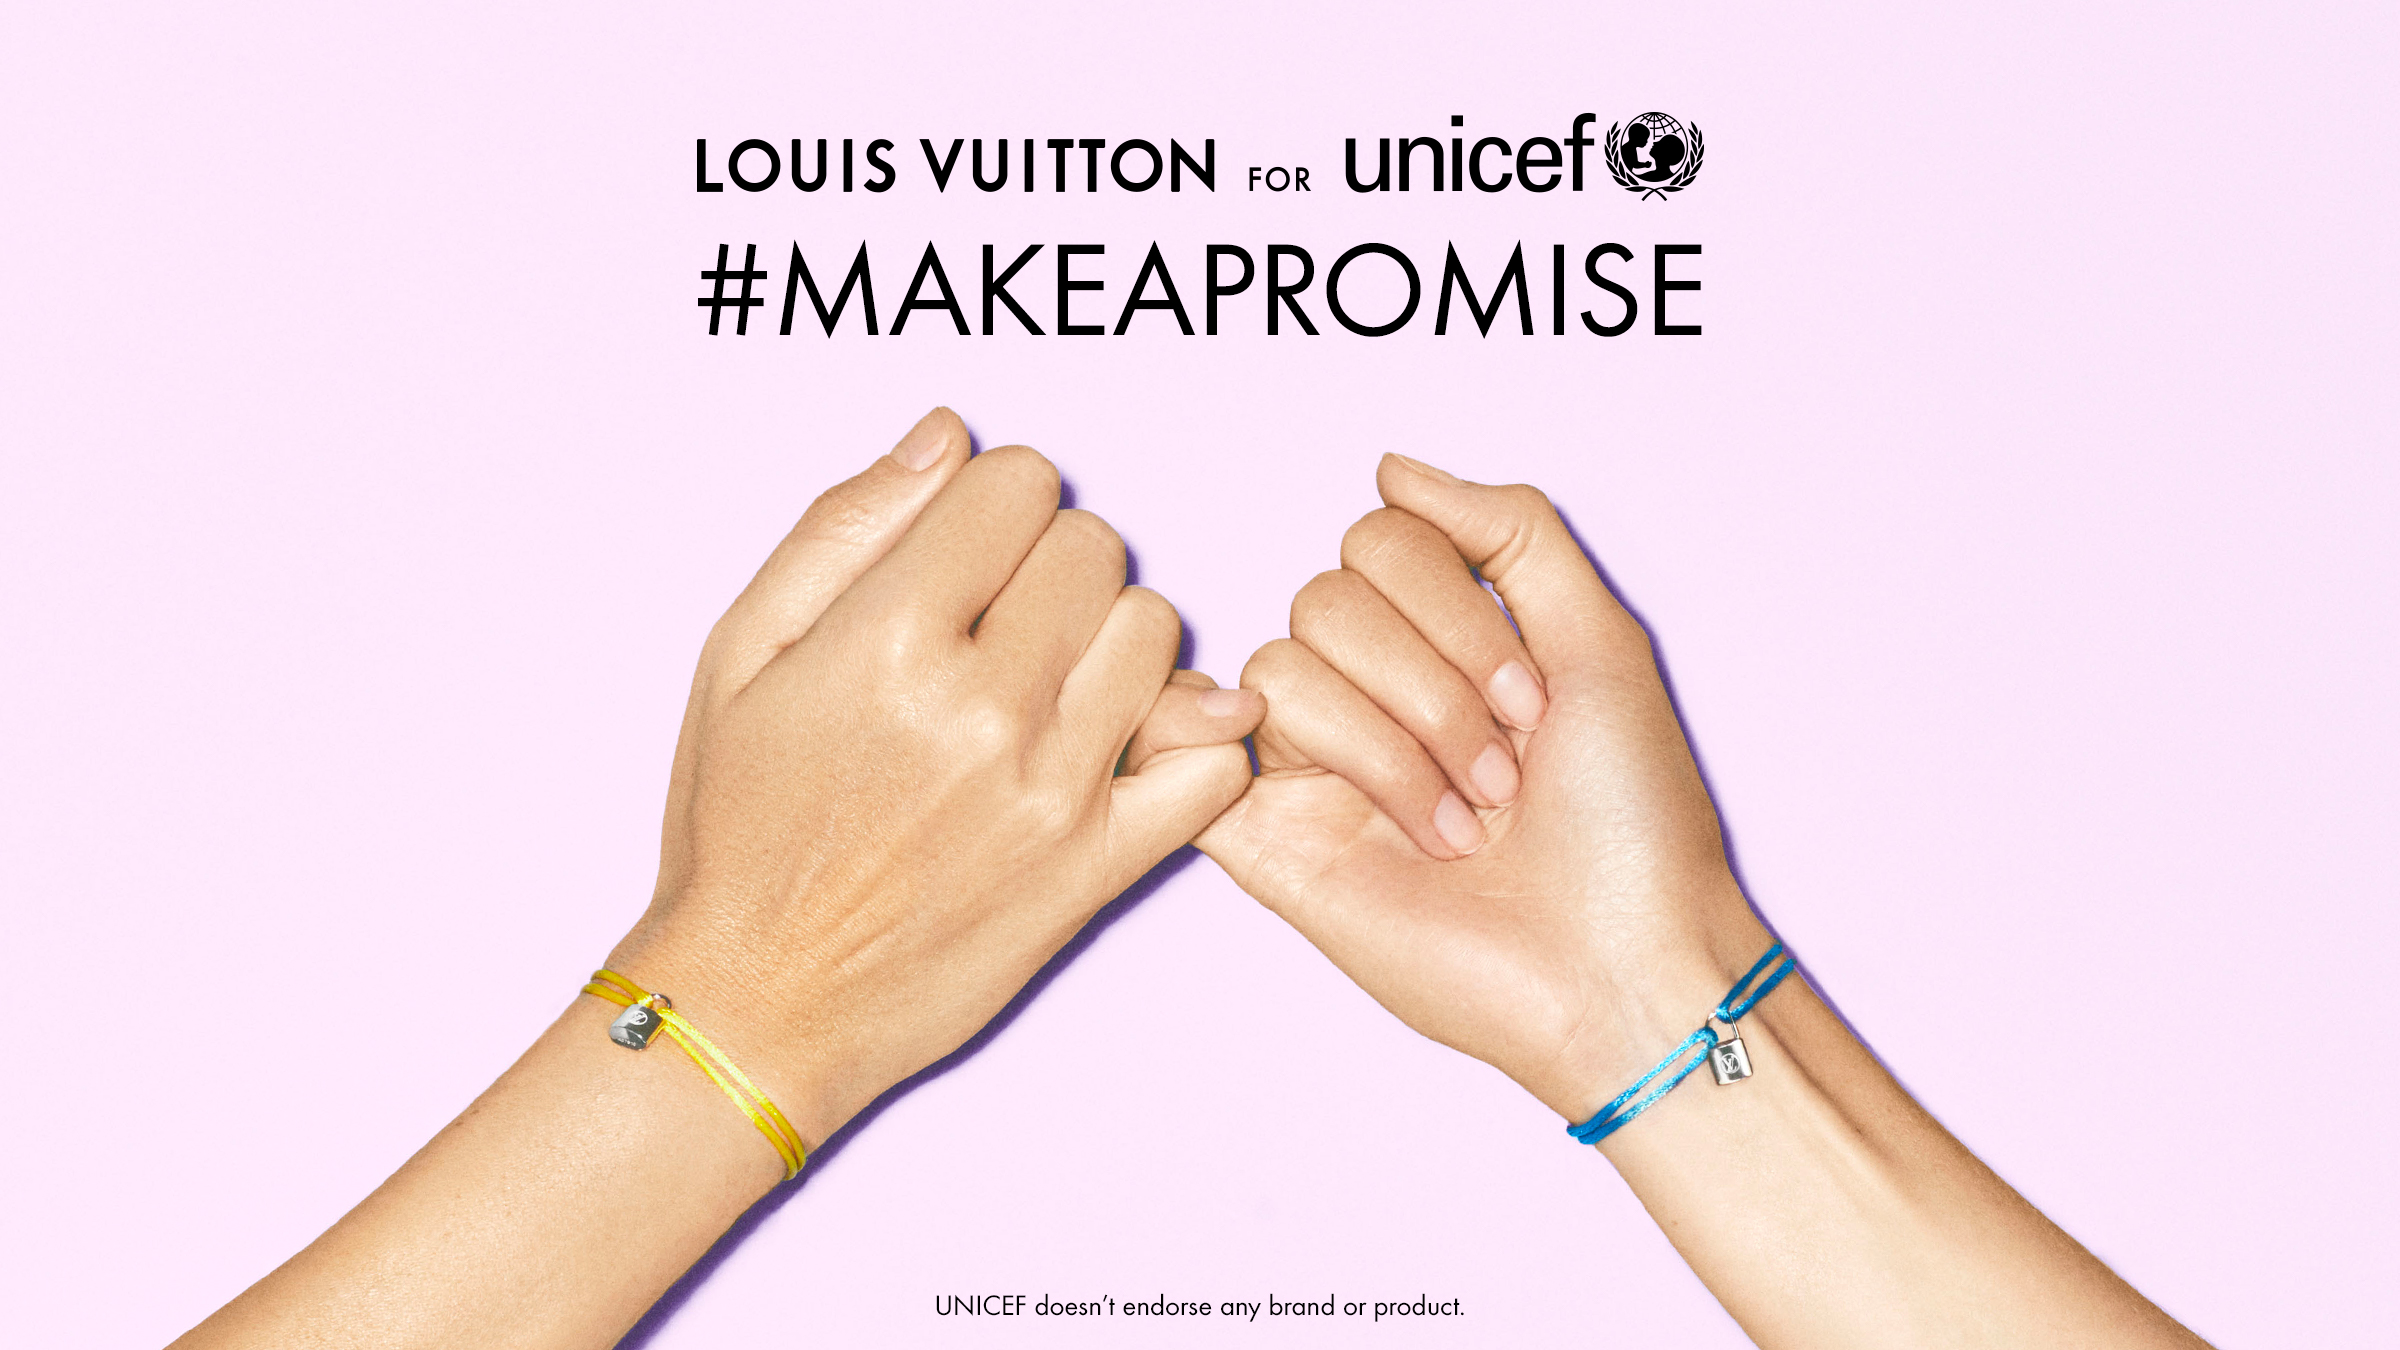 Louis Vuitton joins UNICEF in appealing for support to children affected by  the Syrian crisis - Lebanon